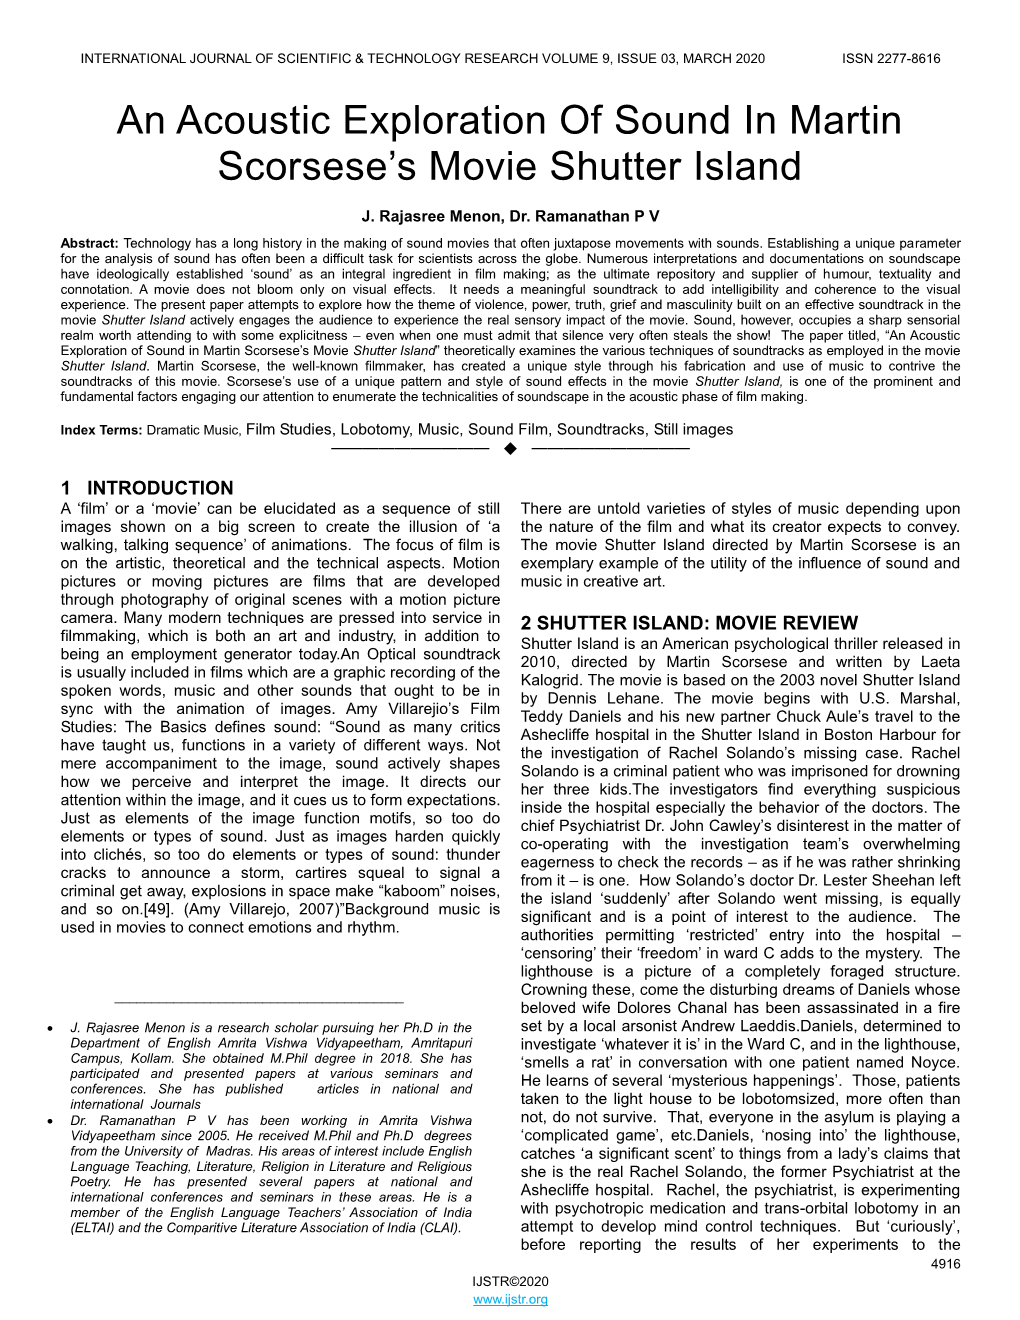 An Acoustic Exploration of Sound in Martin Scorsese's Movie Shutter Island